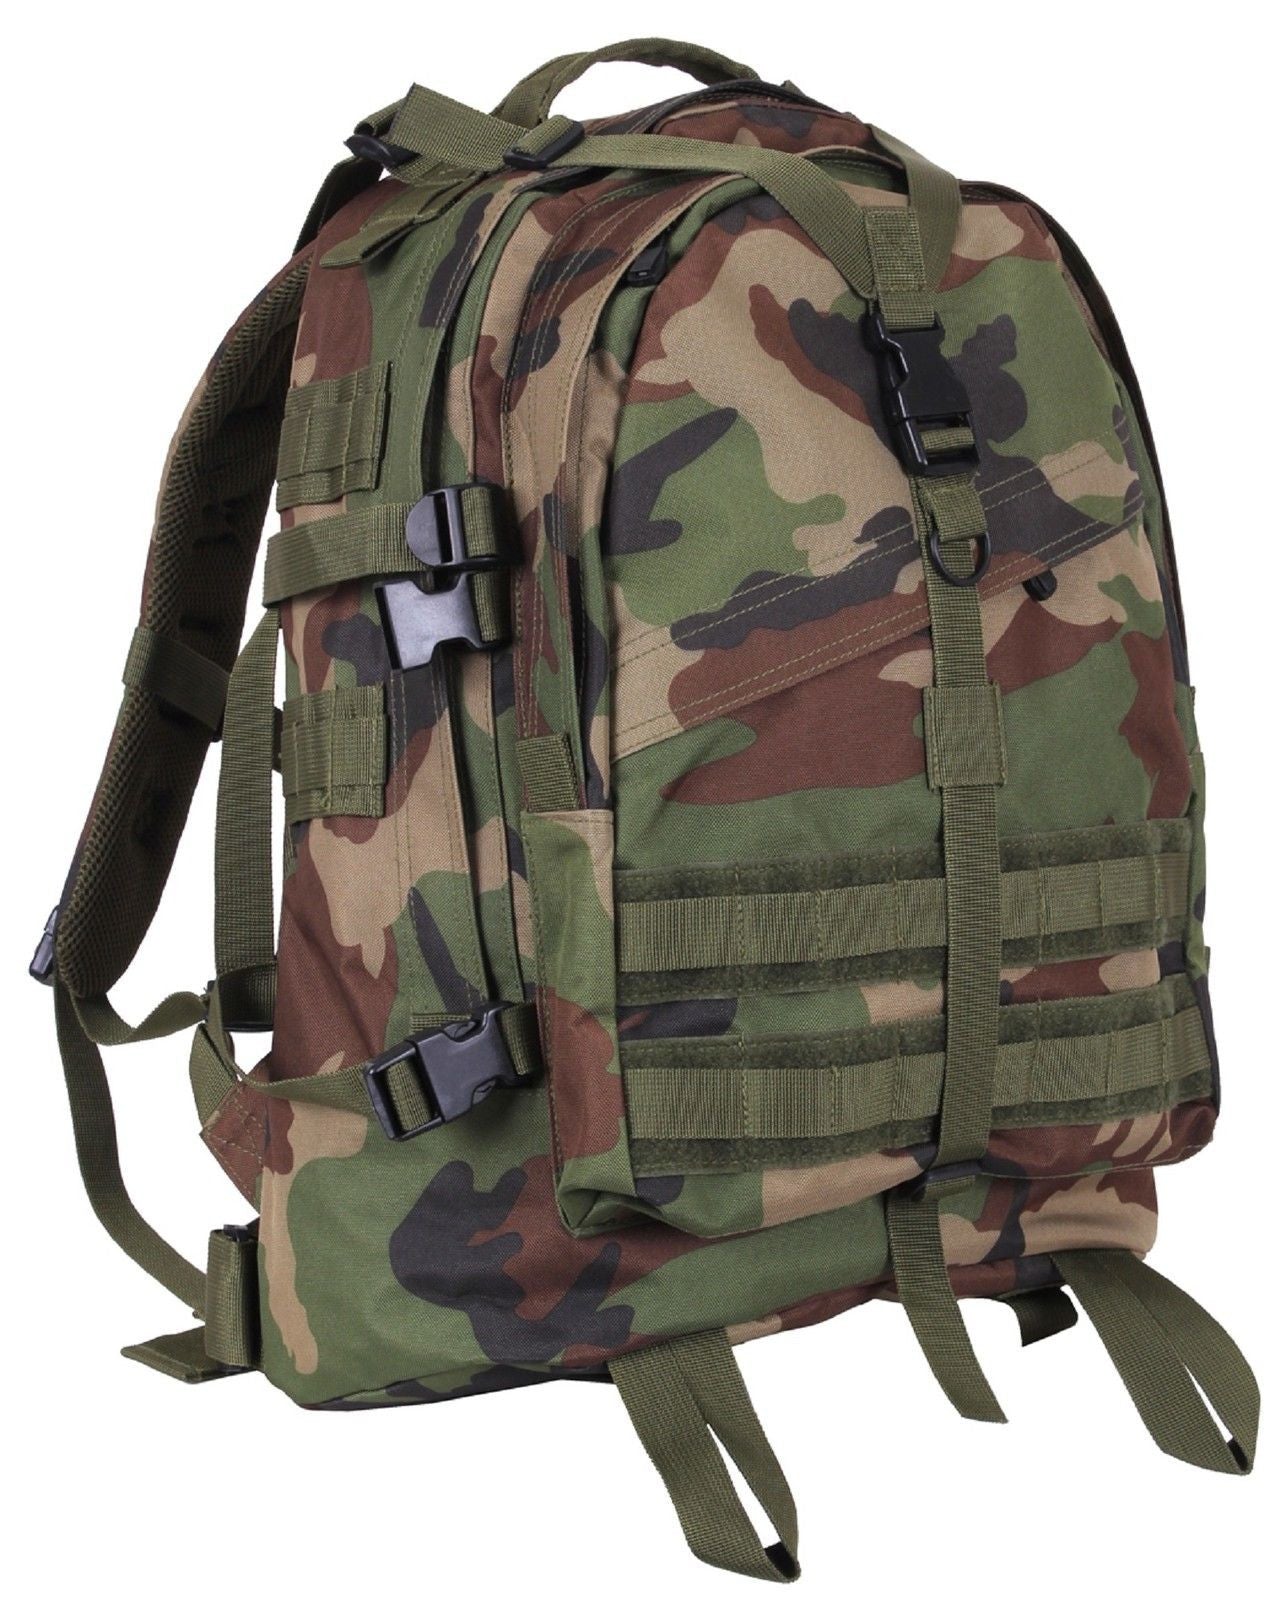 Woodland Camouflage Large Transport Pack Backpack - Camo 19" MOLLE Tactical Bag